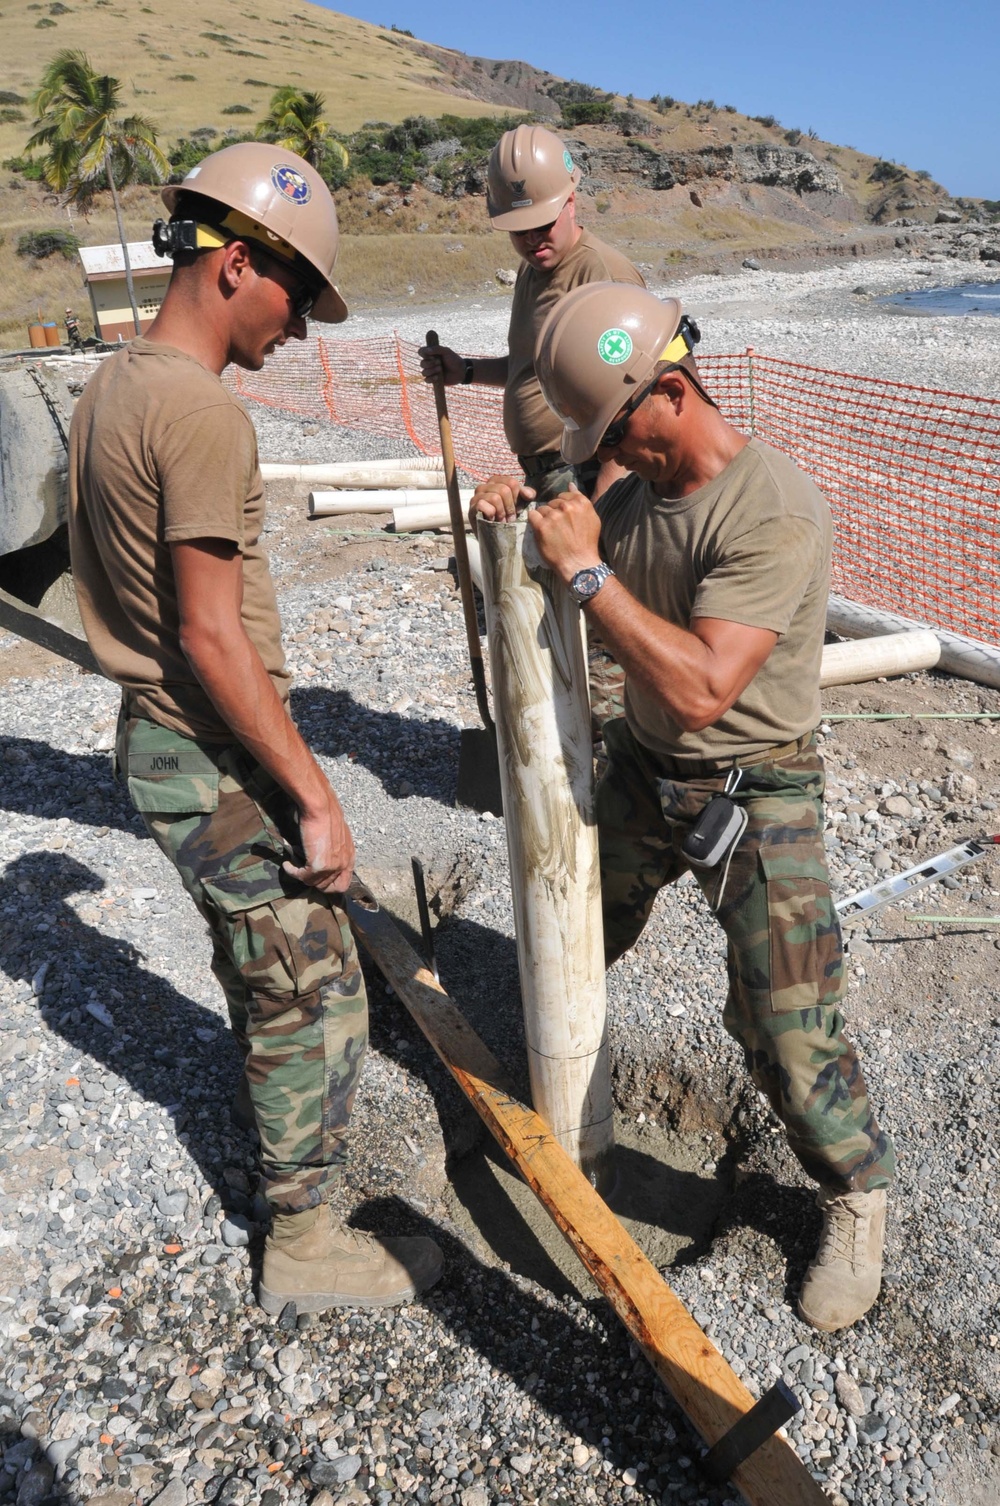 Seabees working in Guantanamo Bay